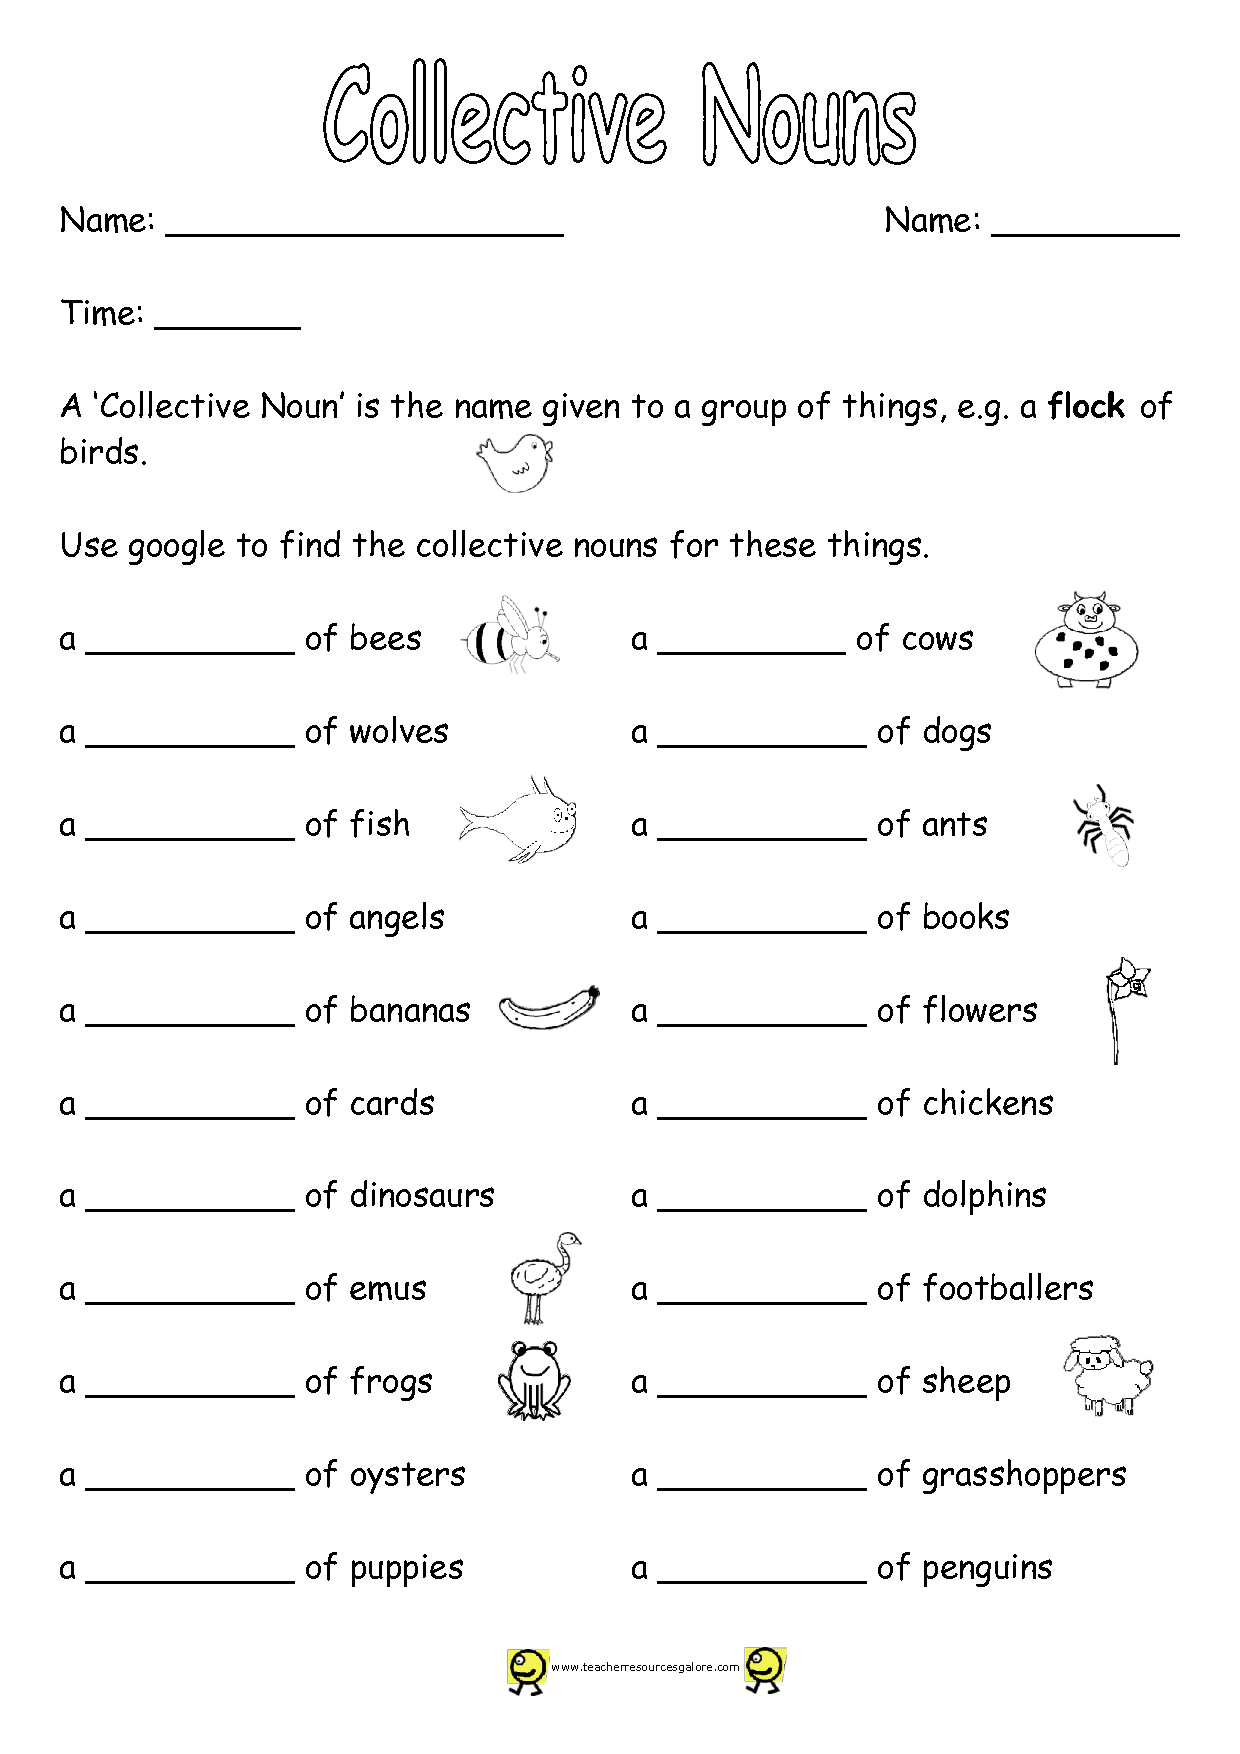 17-best-images-of-noun-coloring-worksheets-2nd-grade-collective-nouns